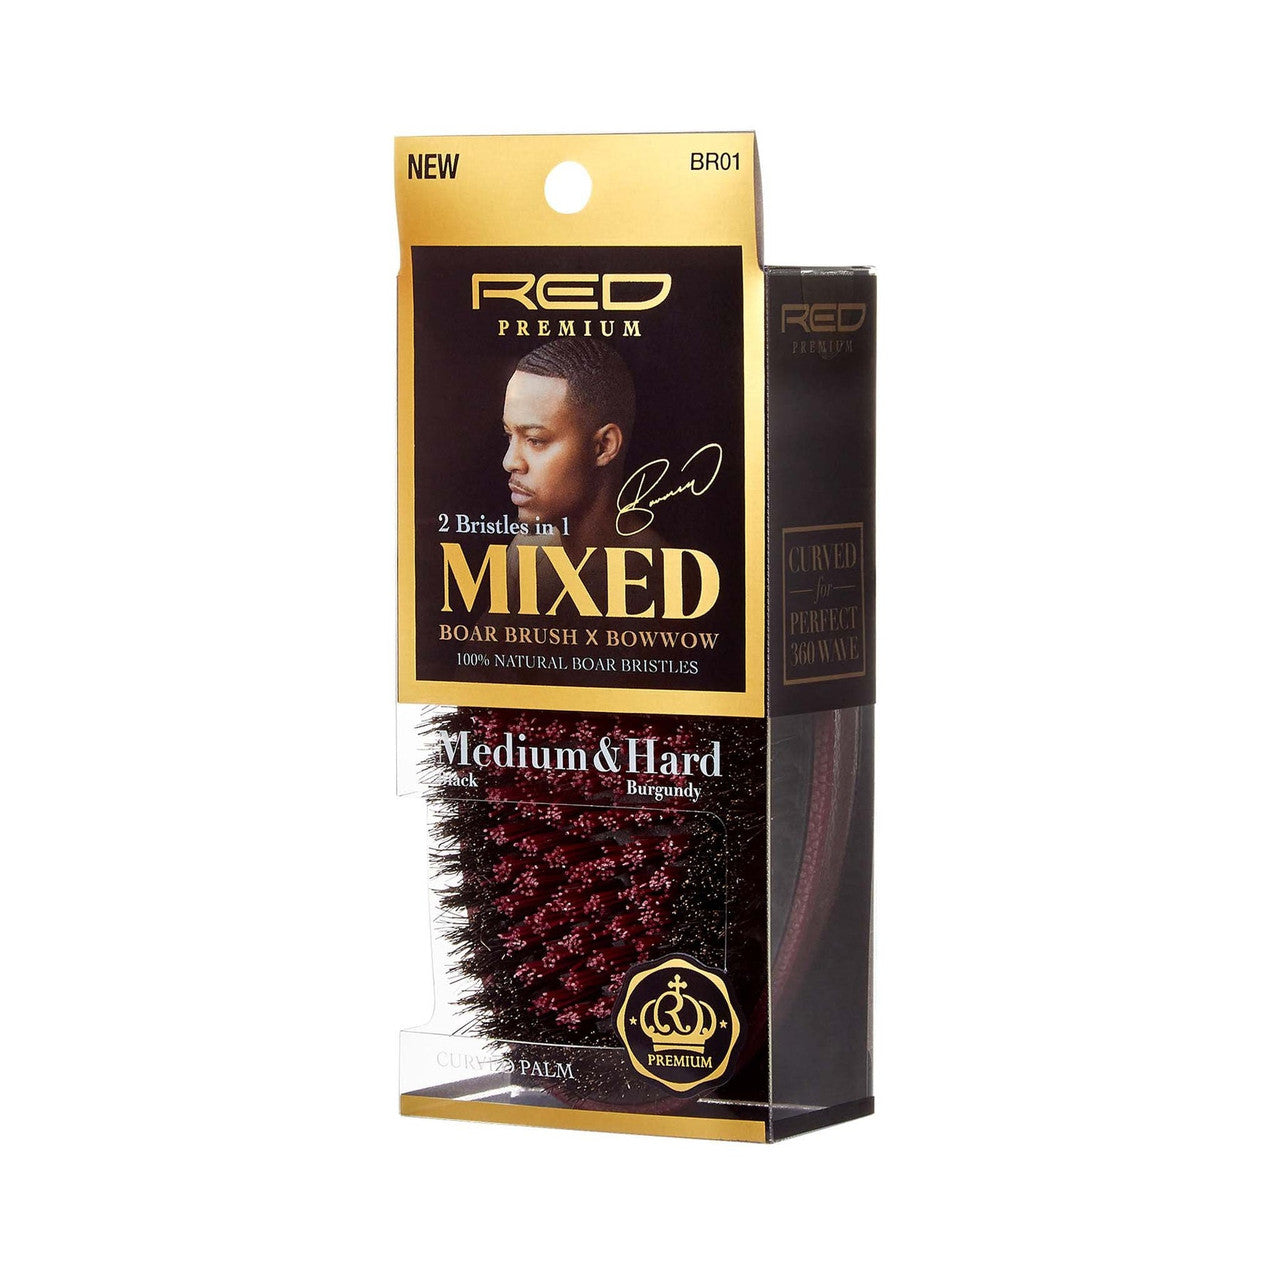 Red Premium Curved Palm Mixed Medium & Hard Boar Brush - Black and Burgundy - BR01